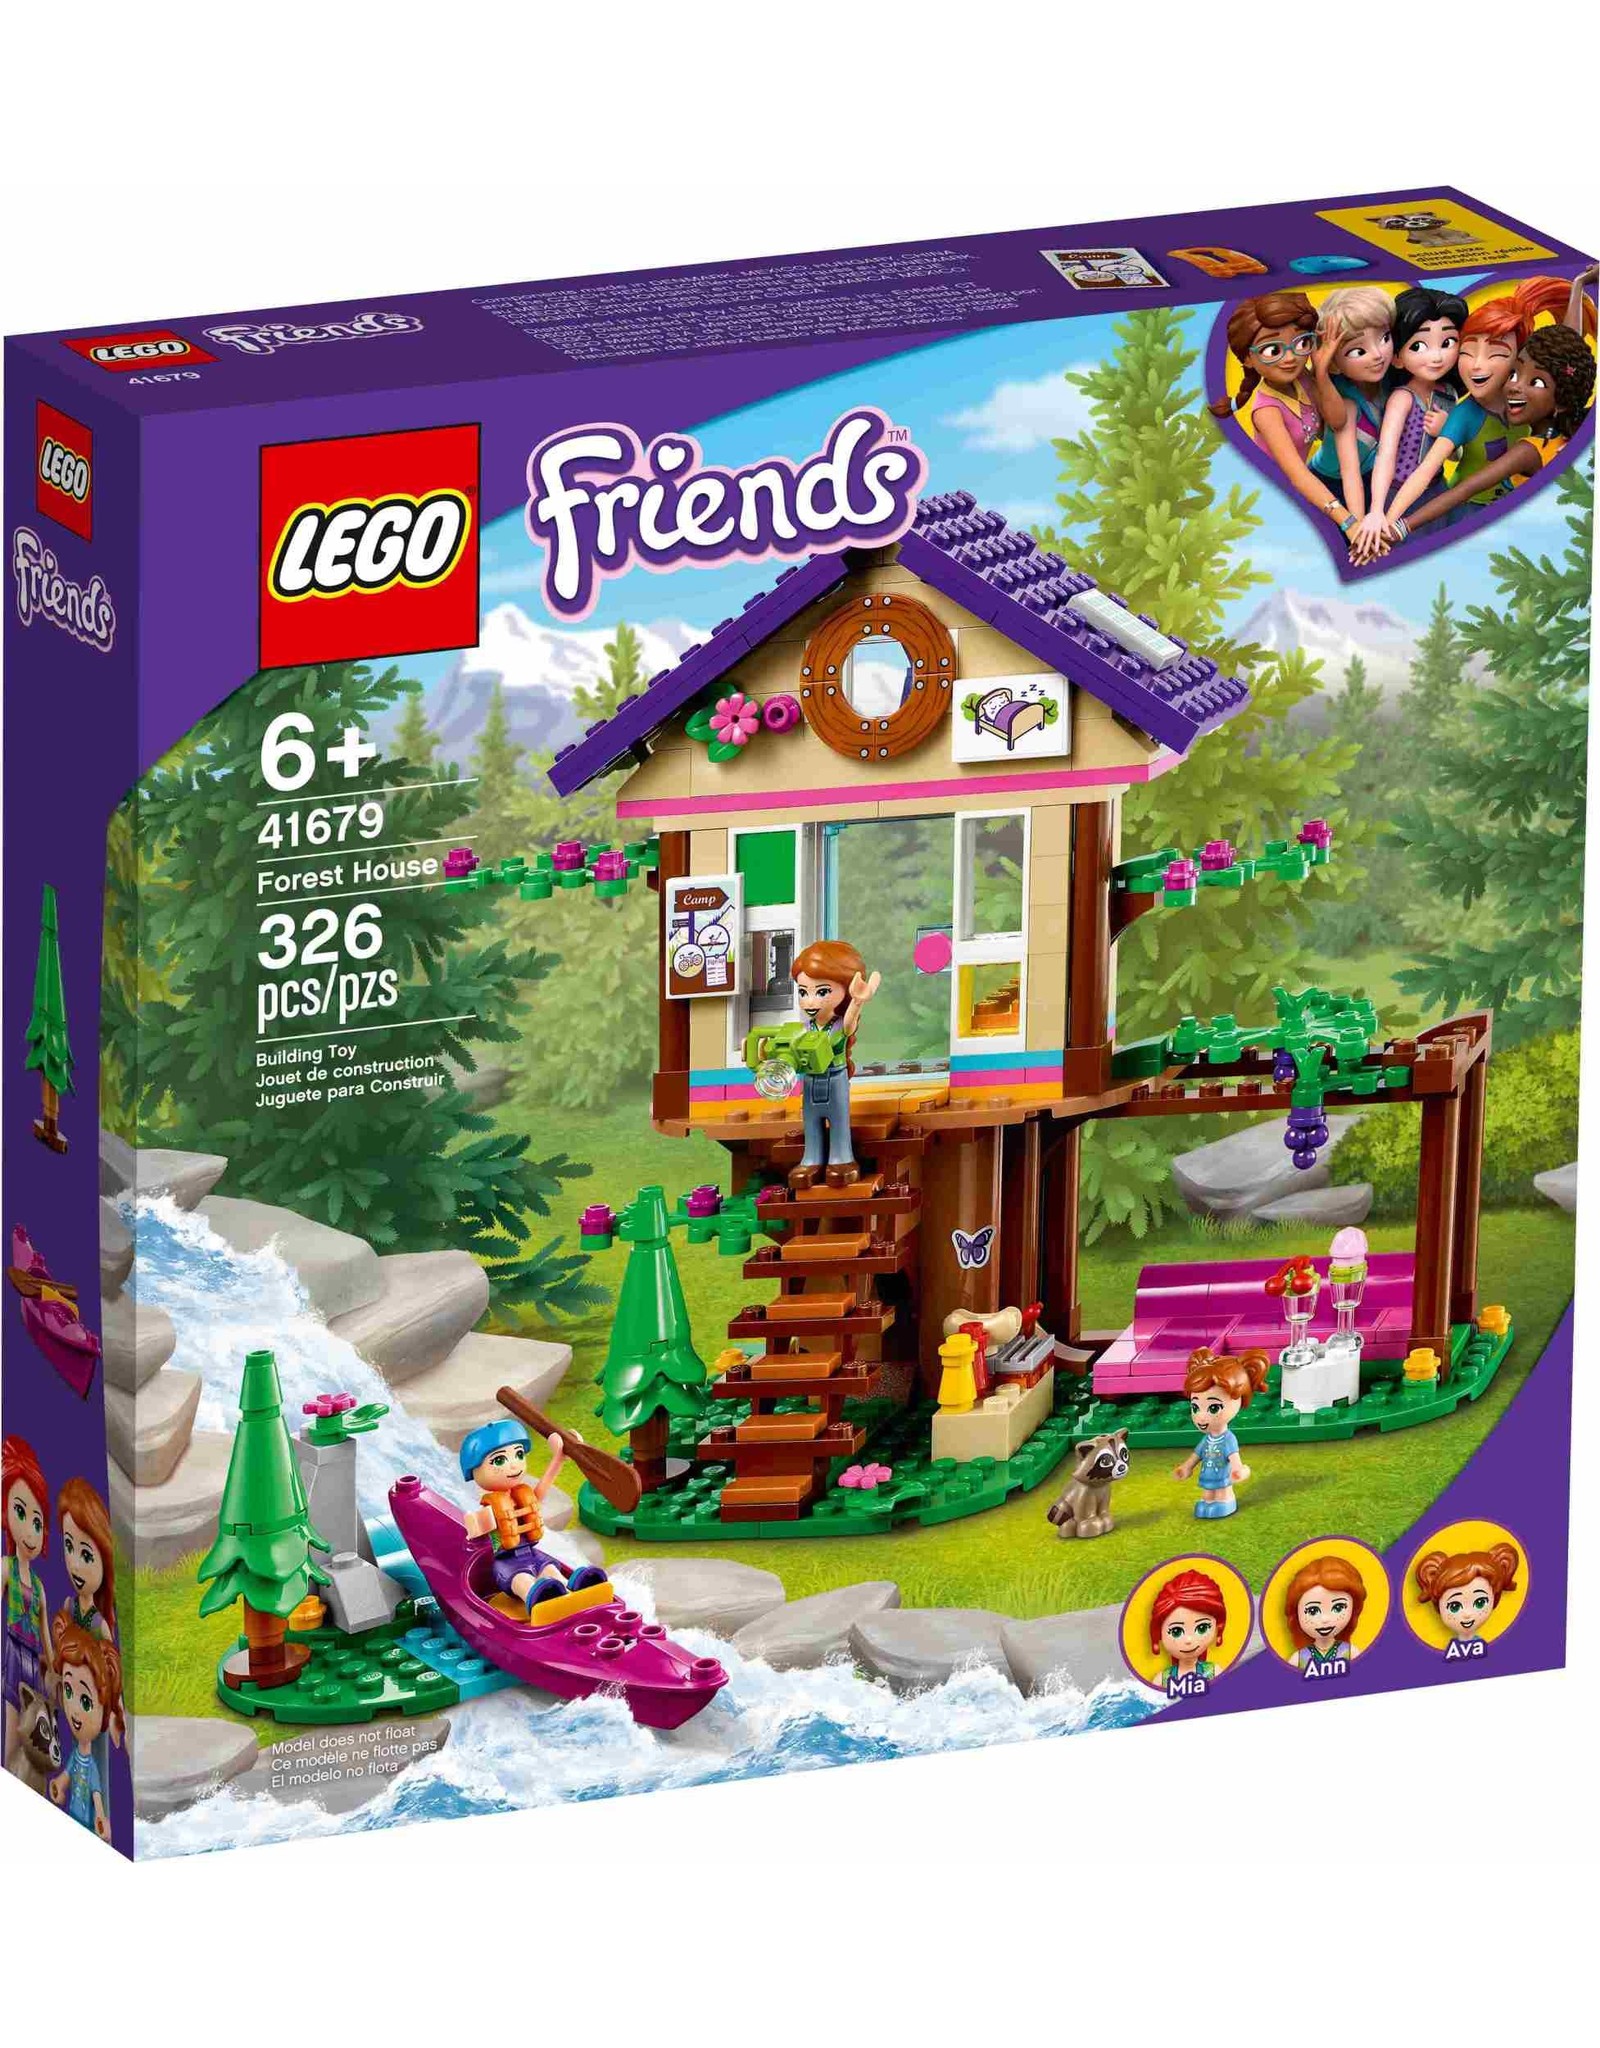 LEGO Friends - 41679 Forest House